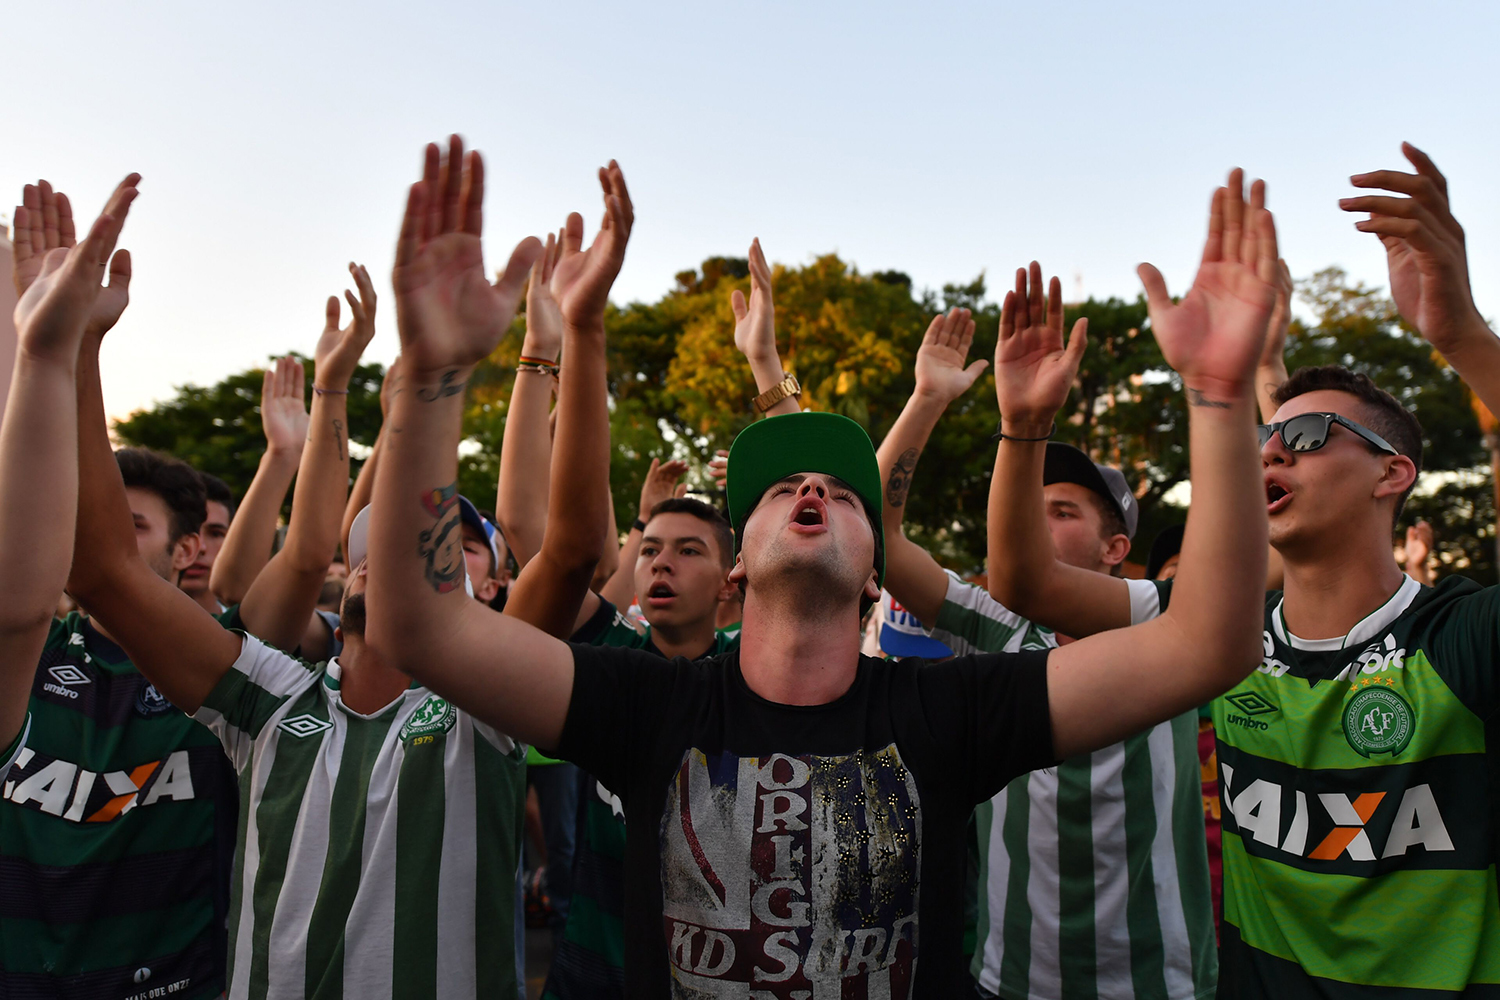 TOPSHOT - People surround a church during a mass in memoriam of the players of Brazilian team Chapecoense Real killed in a plane crash in the Colombian mountains, in Chapeco, in the southern Brazilian state of Santa Catarina, on November 29, 2016. Players of the Chapecoense were among 81 people on board the doomed flight that crashed into mountains in northwestern Colombia, in which officials said just six people were thought to have survived, including three of the players. Chapecoense had risen from obscurity to make it to the Copa Sudamericana finals scheduled for Wednesday against Atletico Nacional of Colombia. / AFP PHOTO / Nelson Almeida / TT / kod 444